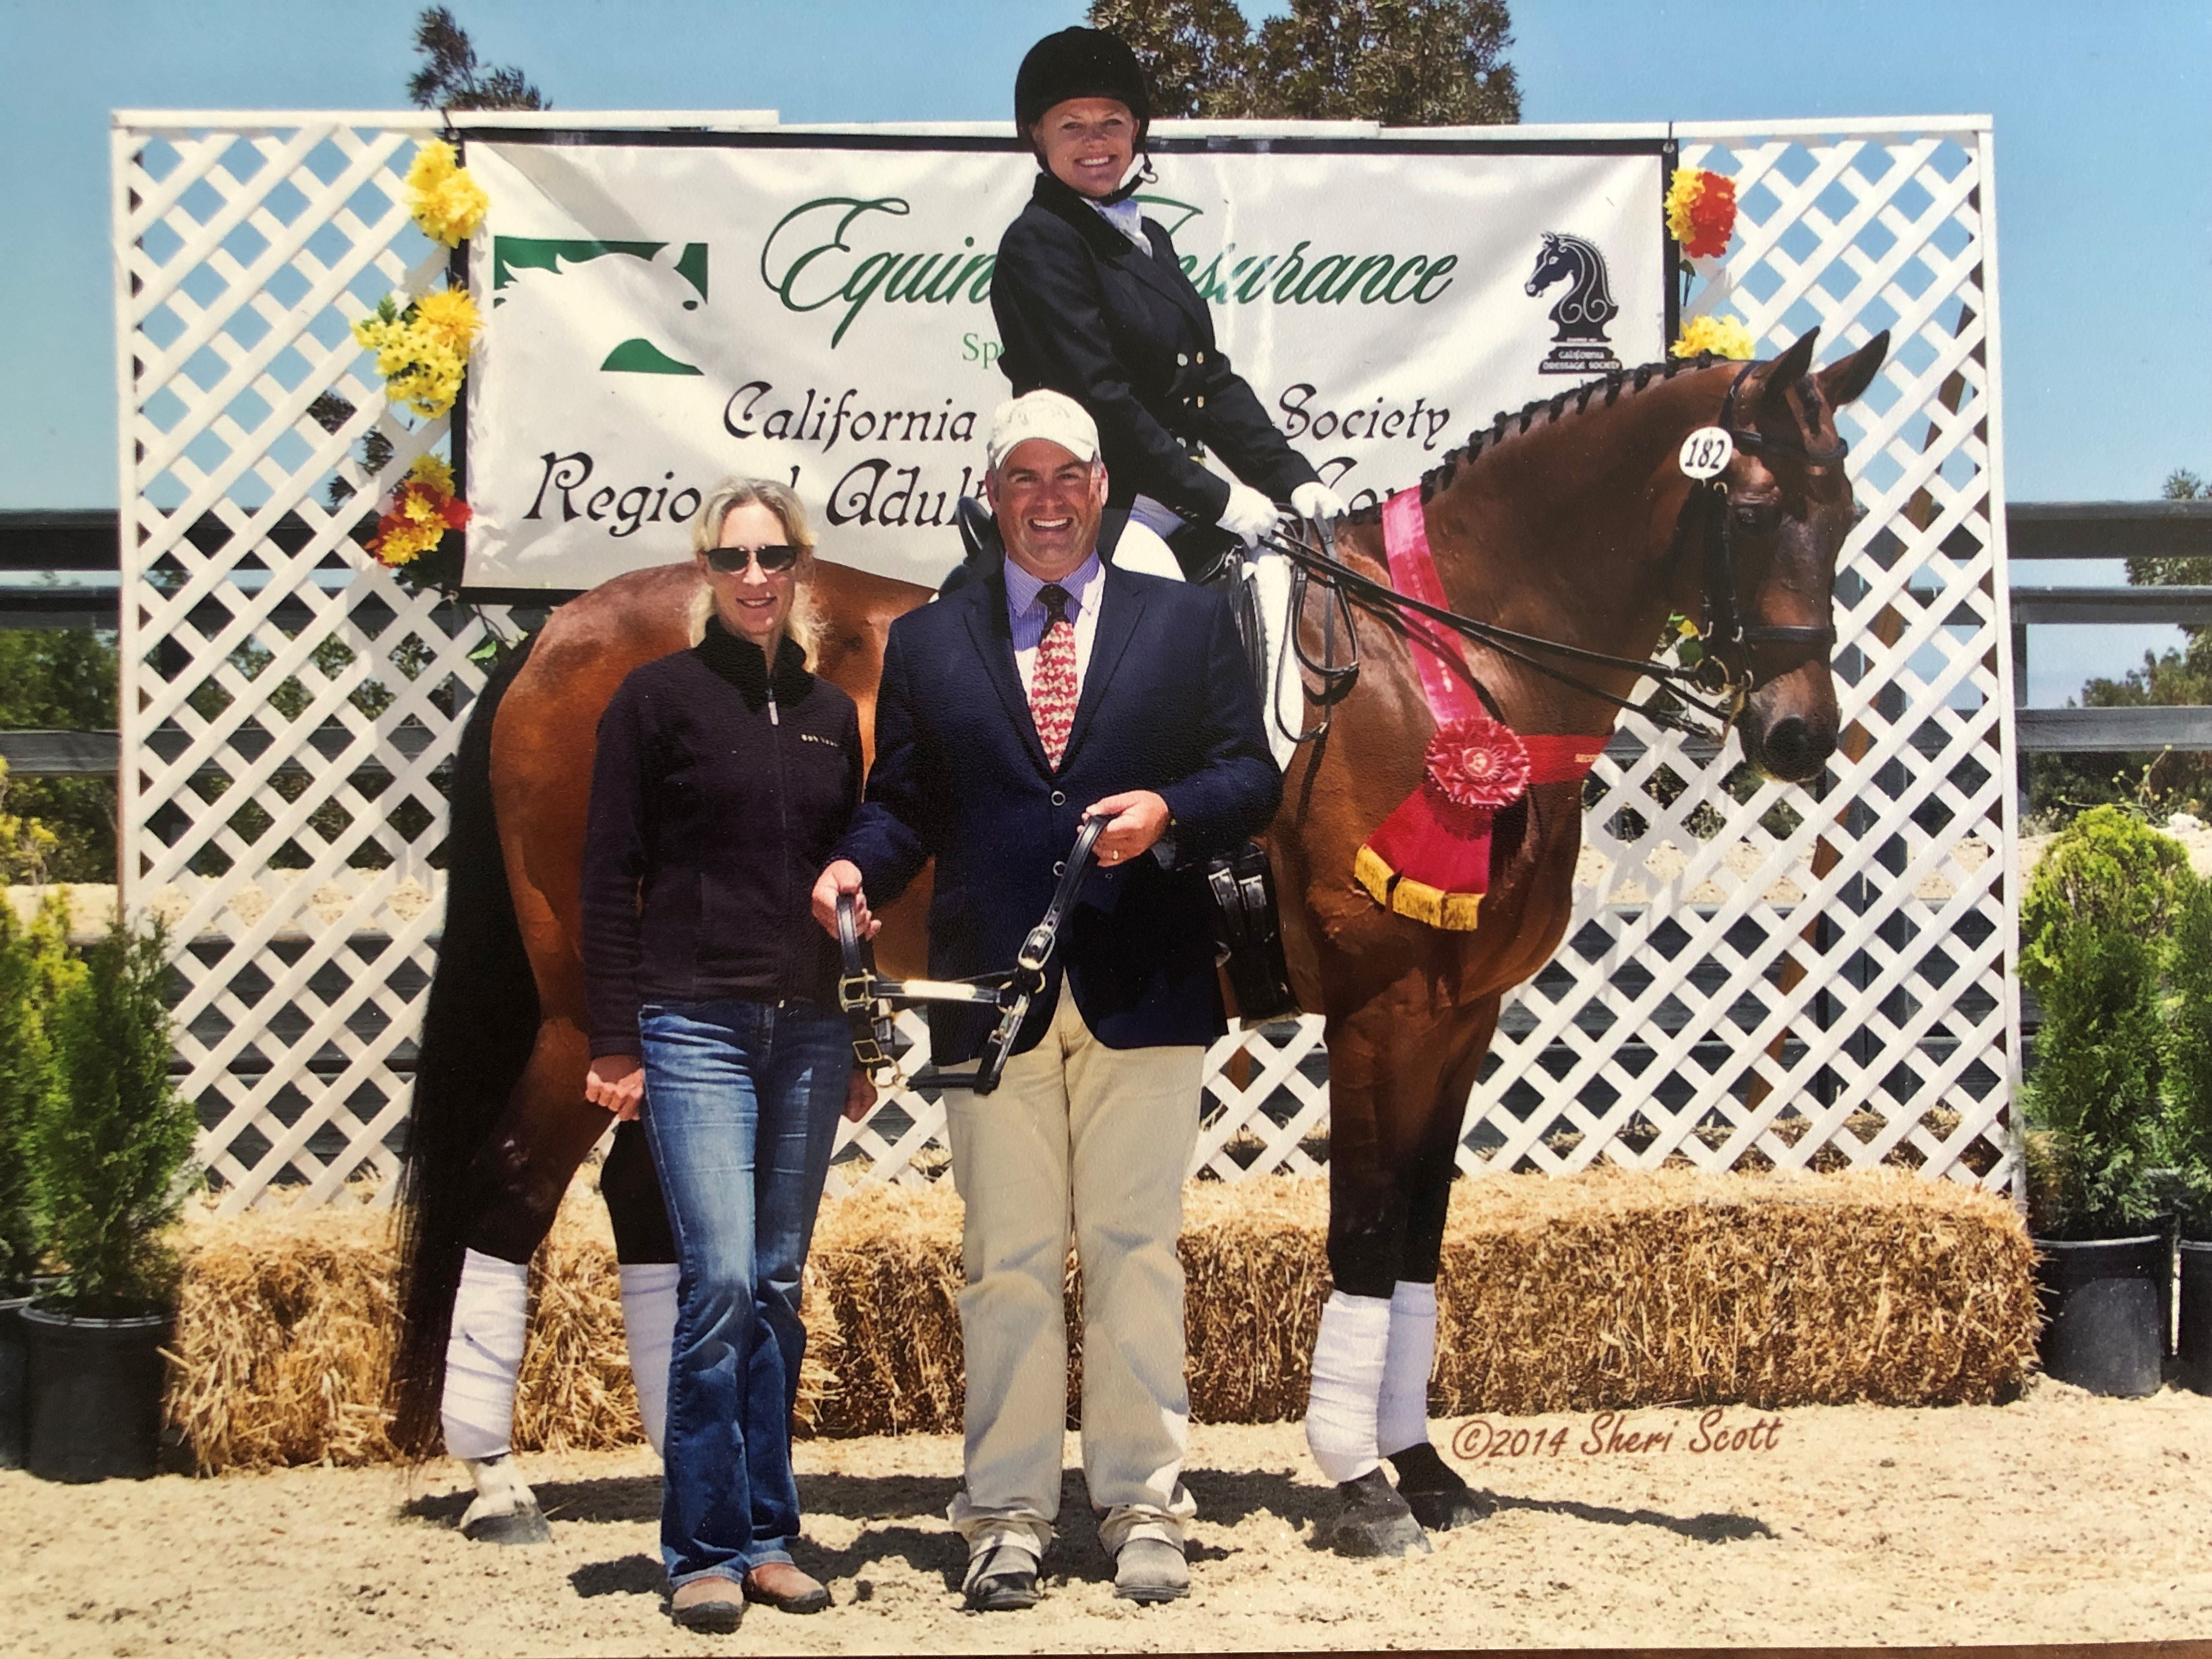 Pam Englund and her horse Laser receiving a championship award